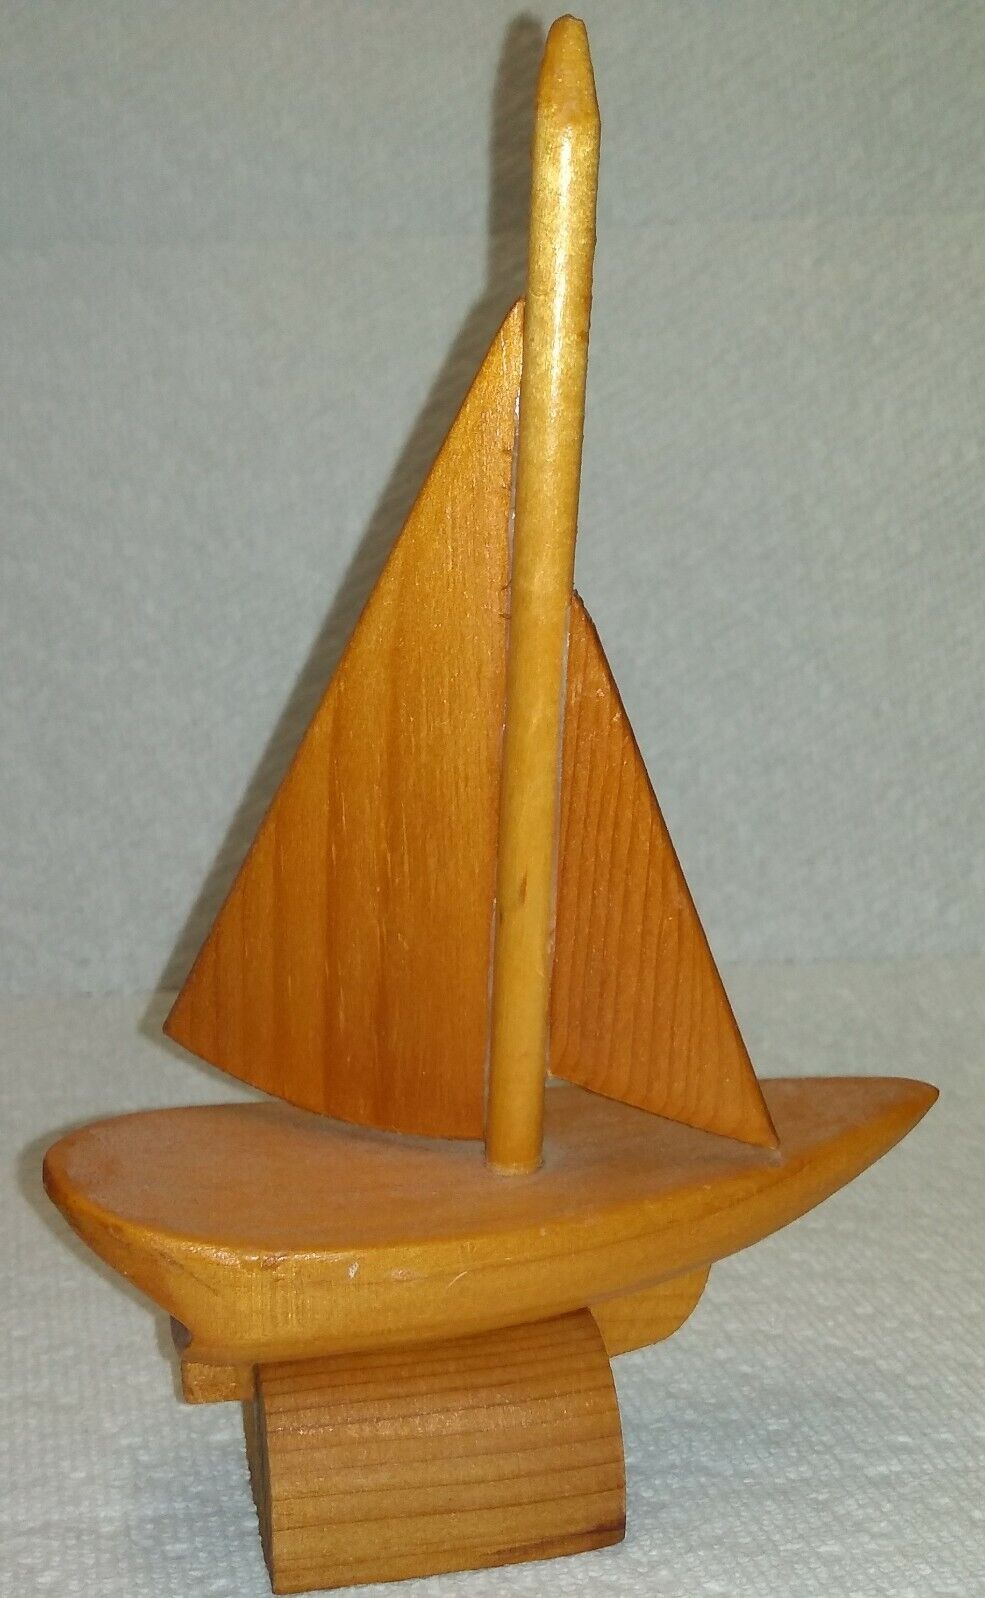 Vintage Handmade Wood Sail Ship - Hand Crafted Carved